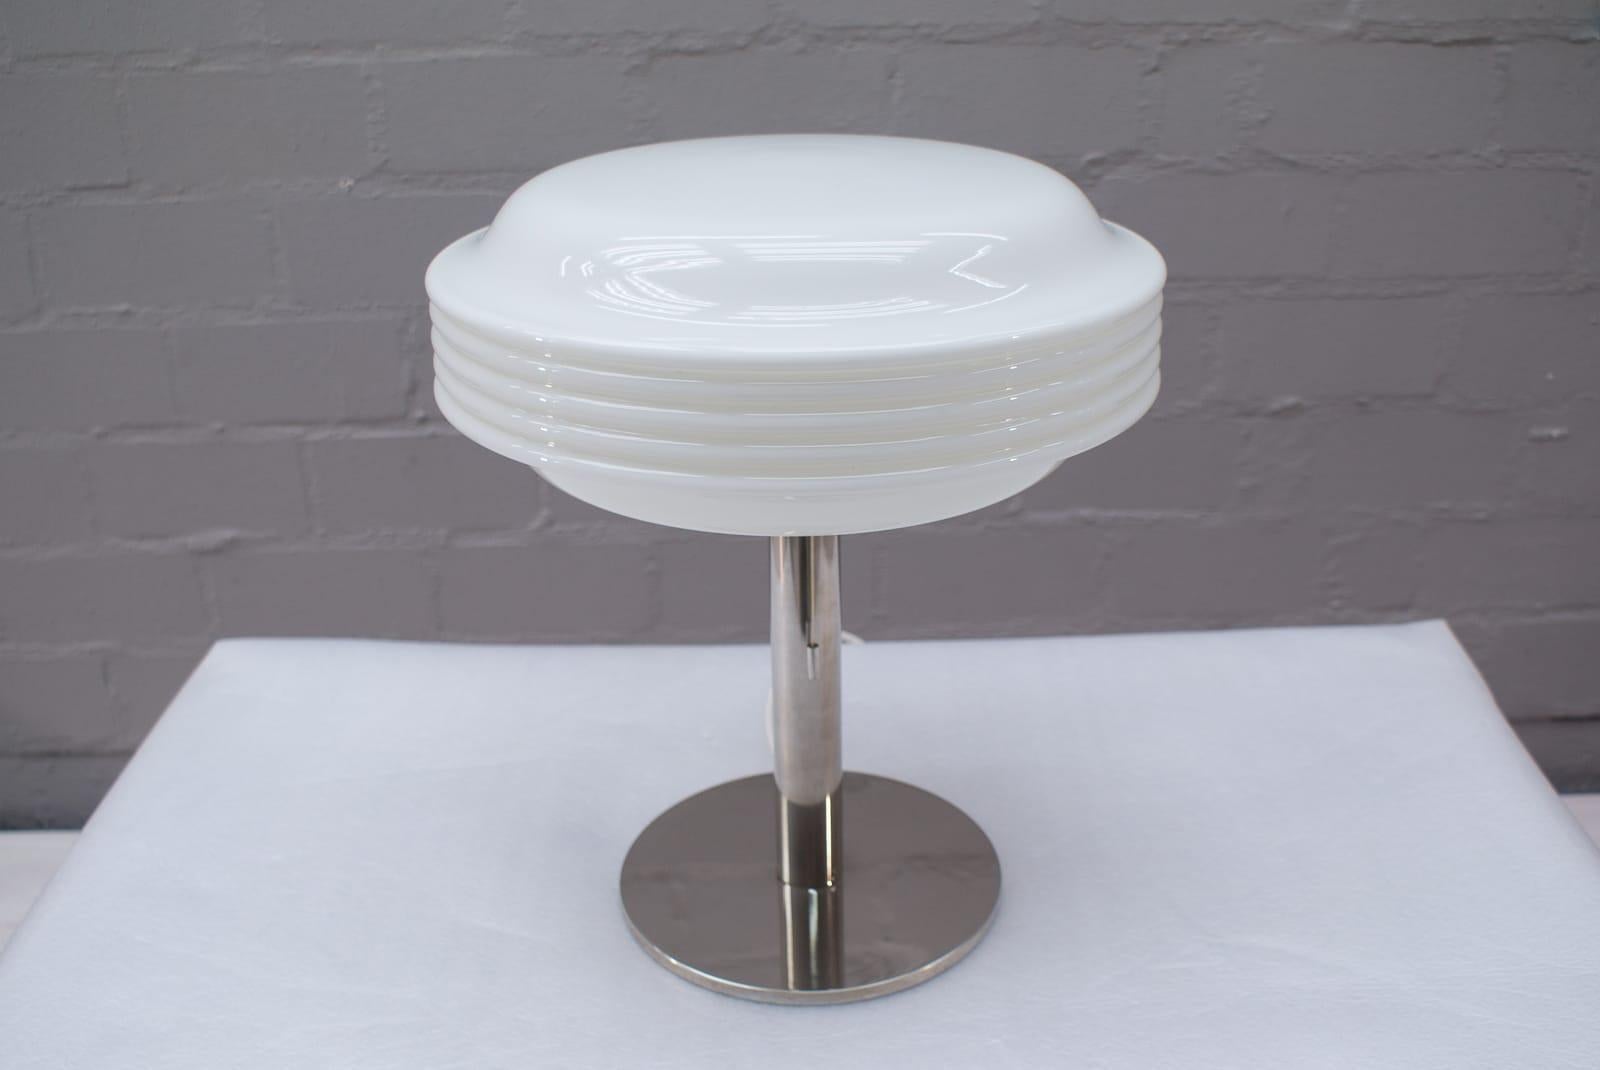 Swiss Lovely Space Age Table Lamp by Temde Leuchten, Switzerland, 1970s For Sale